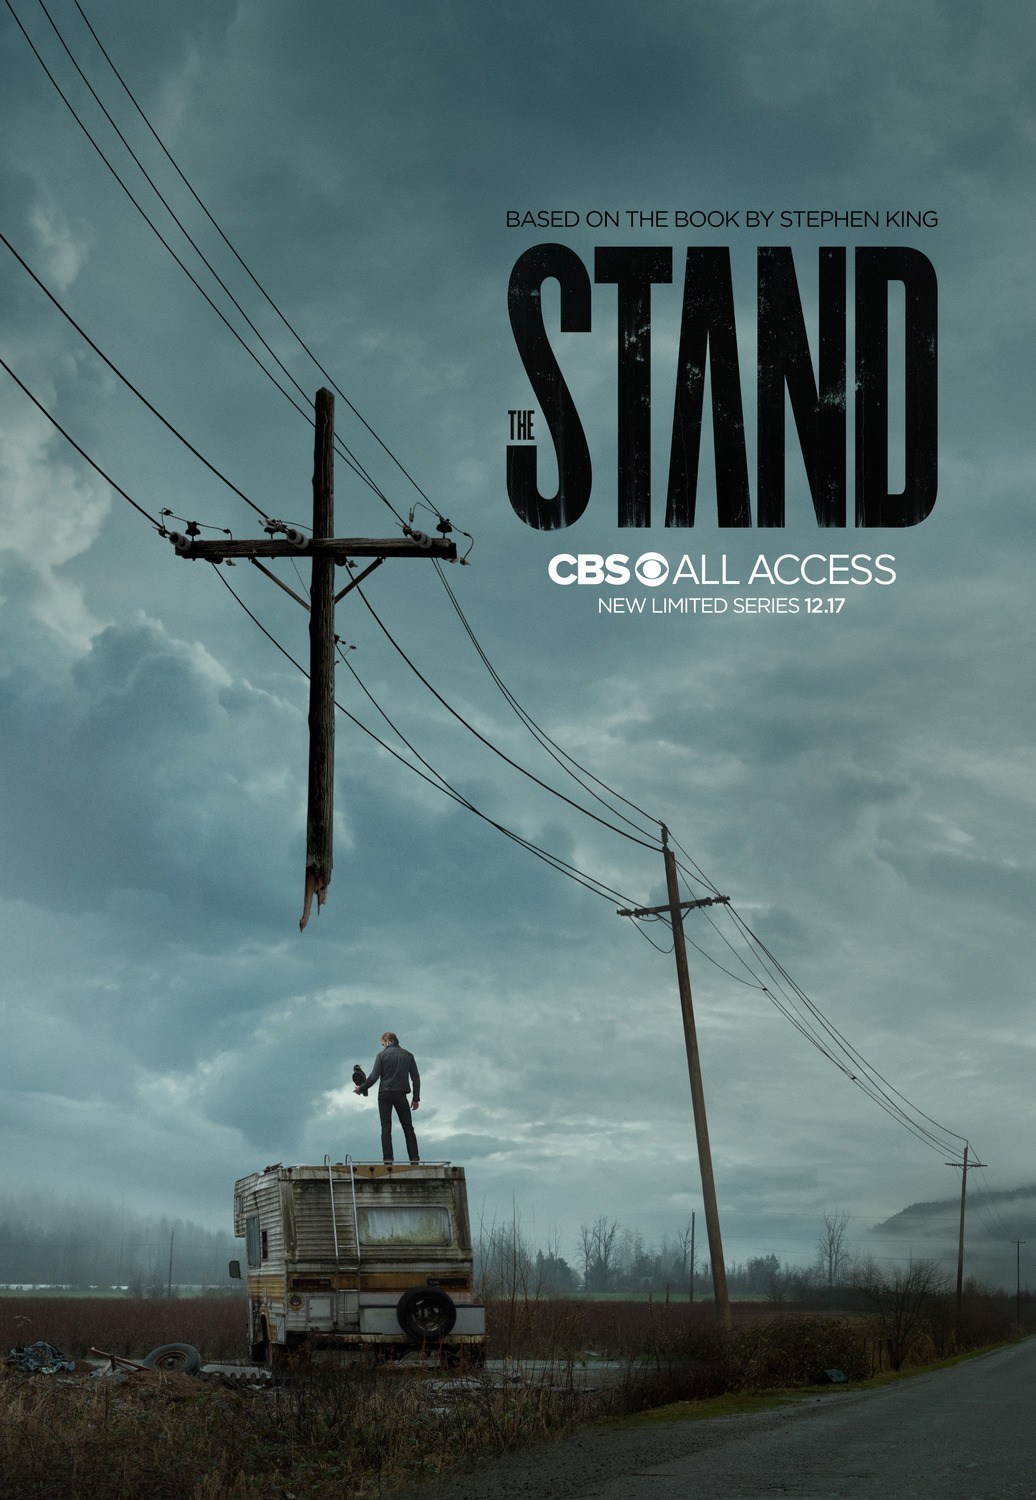 The Stand Episode 6: Release date, Story, All The Juicy Details!